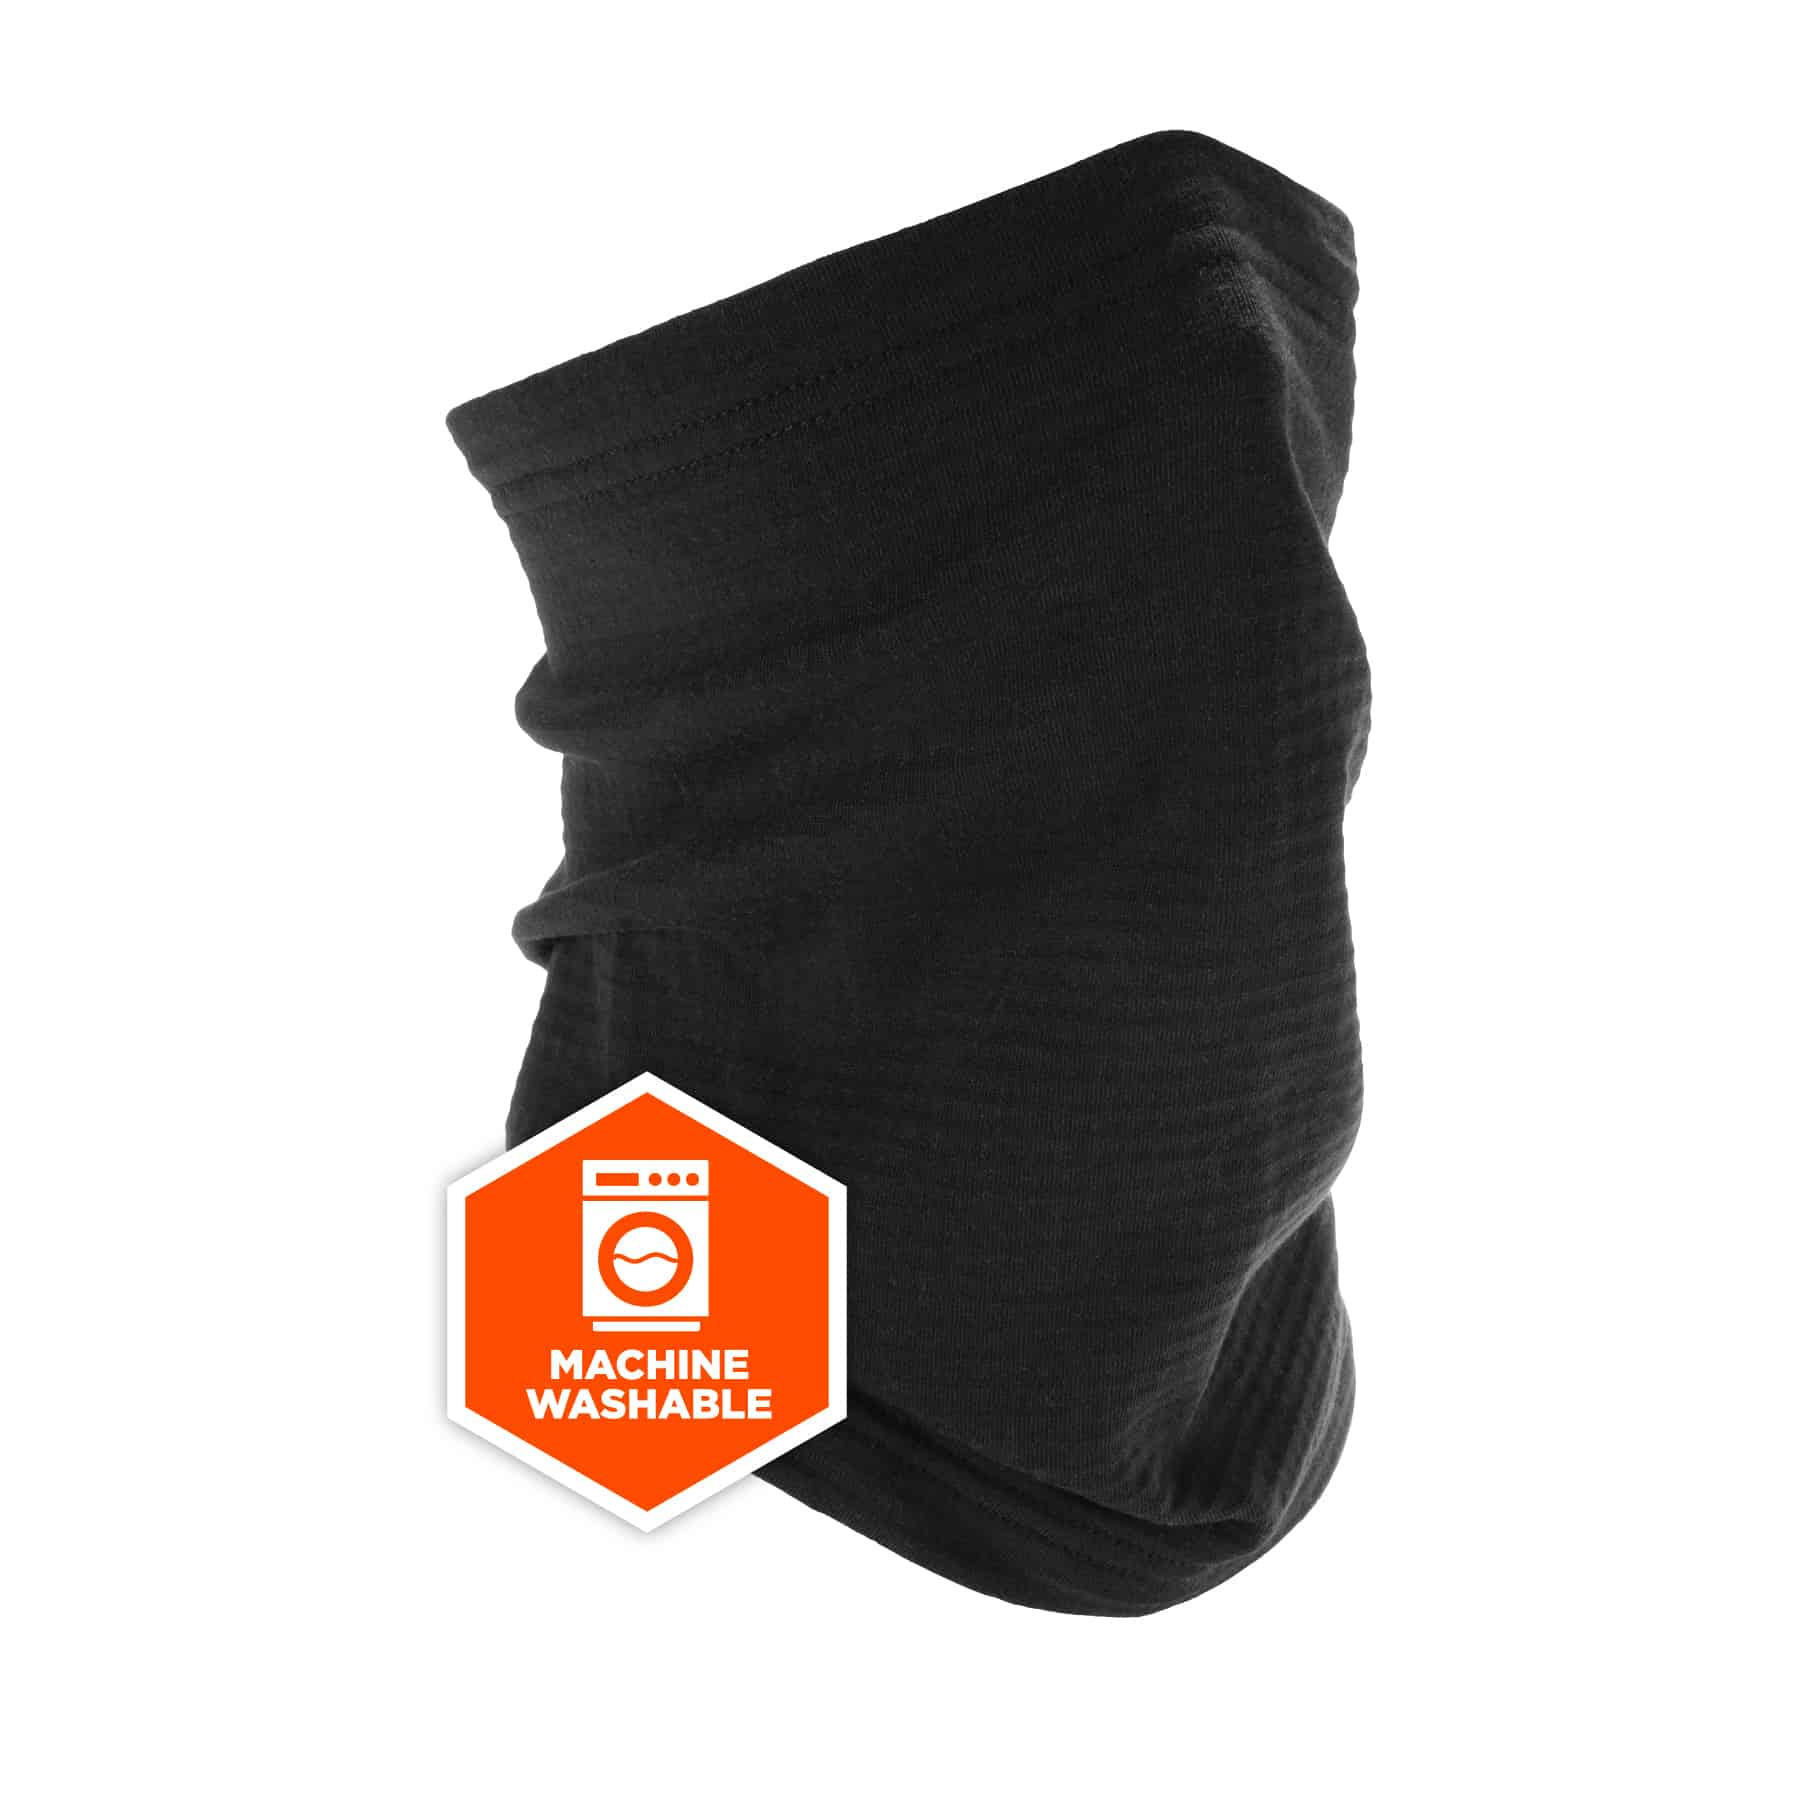 Ergodyne Black Synthetic Neck Warmer (One Size Fits Most) in the 